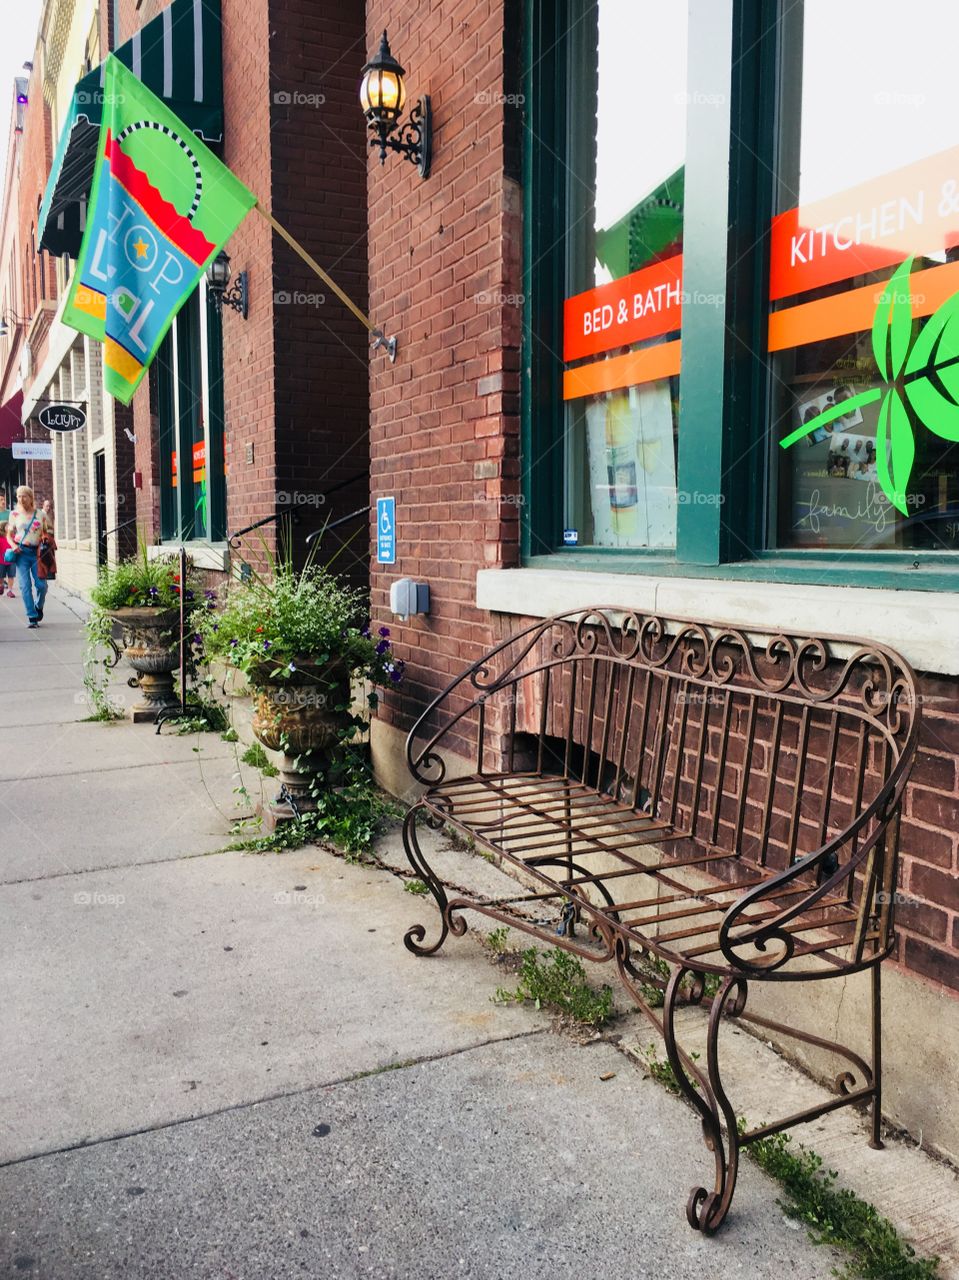 Window Shopping in Downtown Stillwater, Minnesota, USA - Up North - Bench